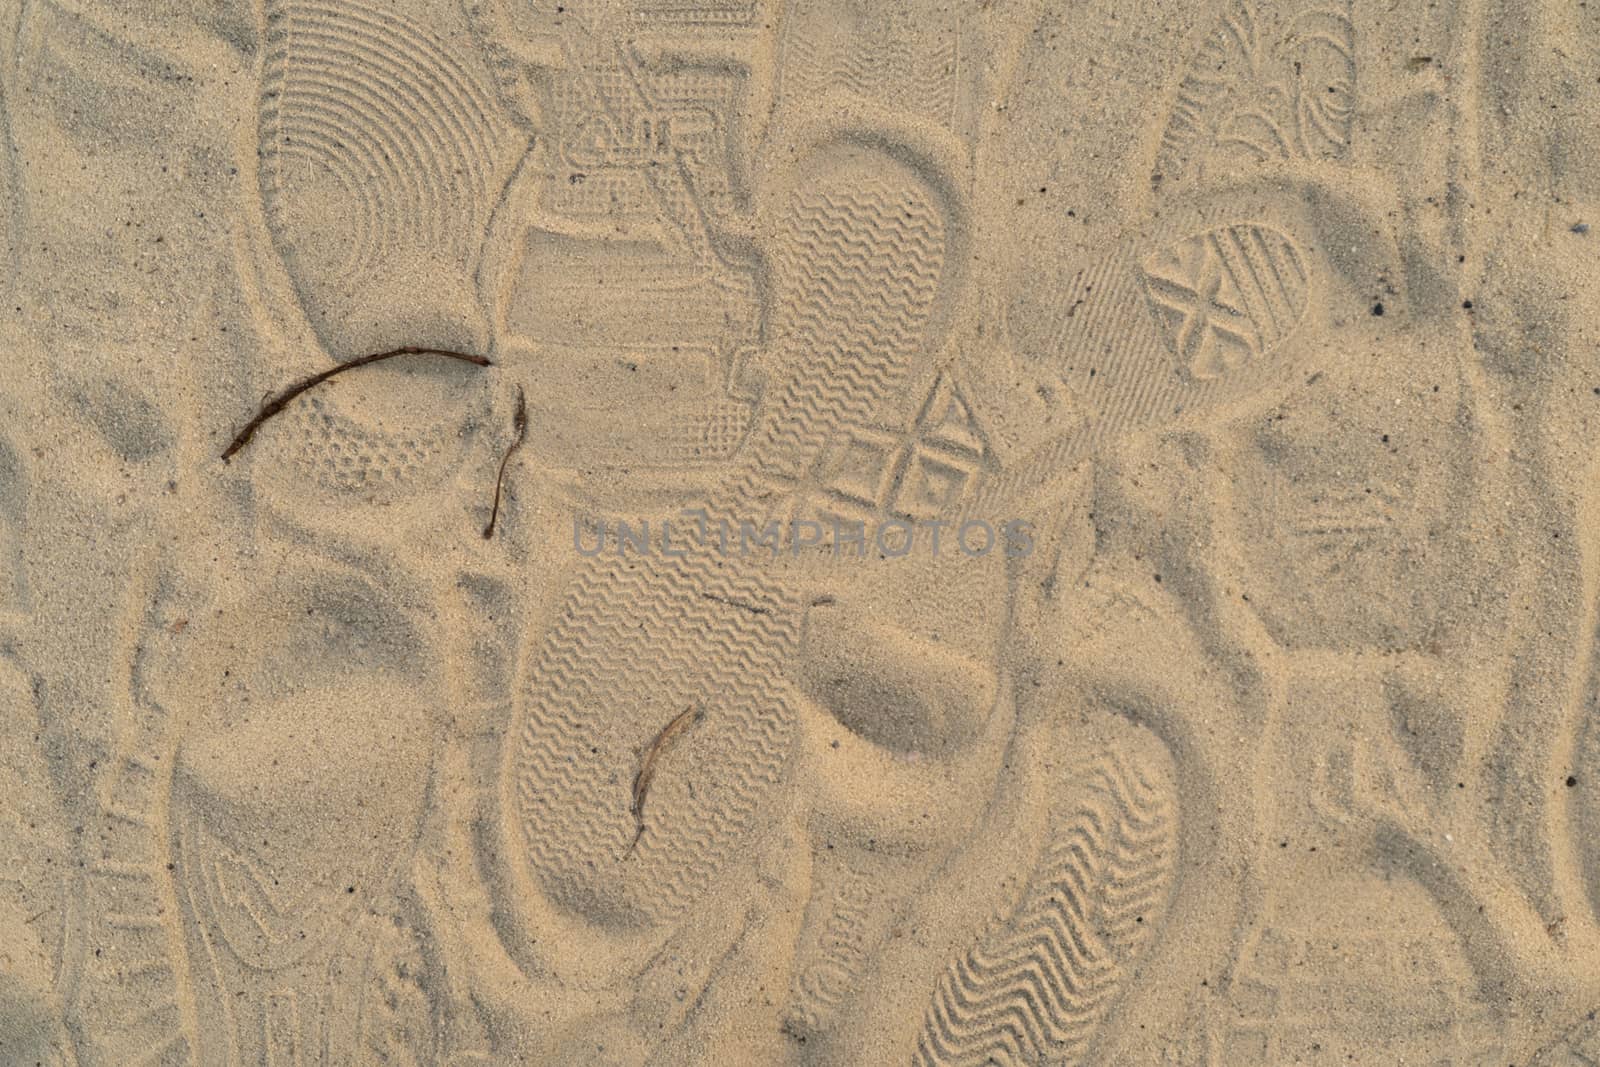 Sand on the beach with footprints and shoes. Many footprints with shoes and without shoes. by alexsdriver